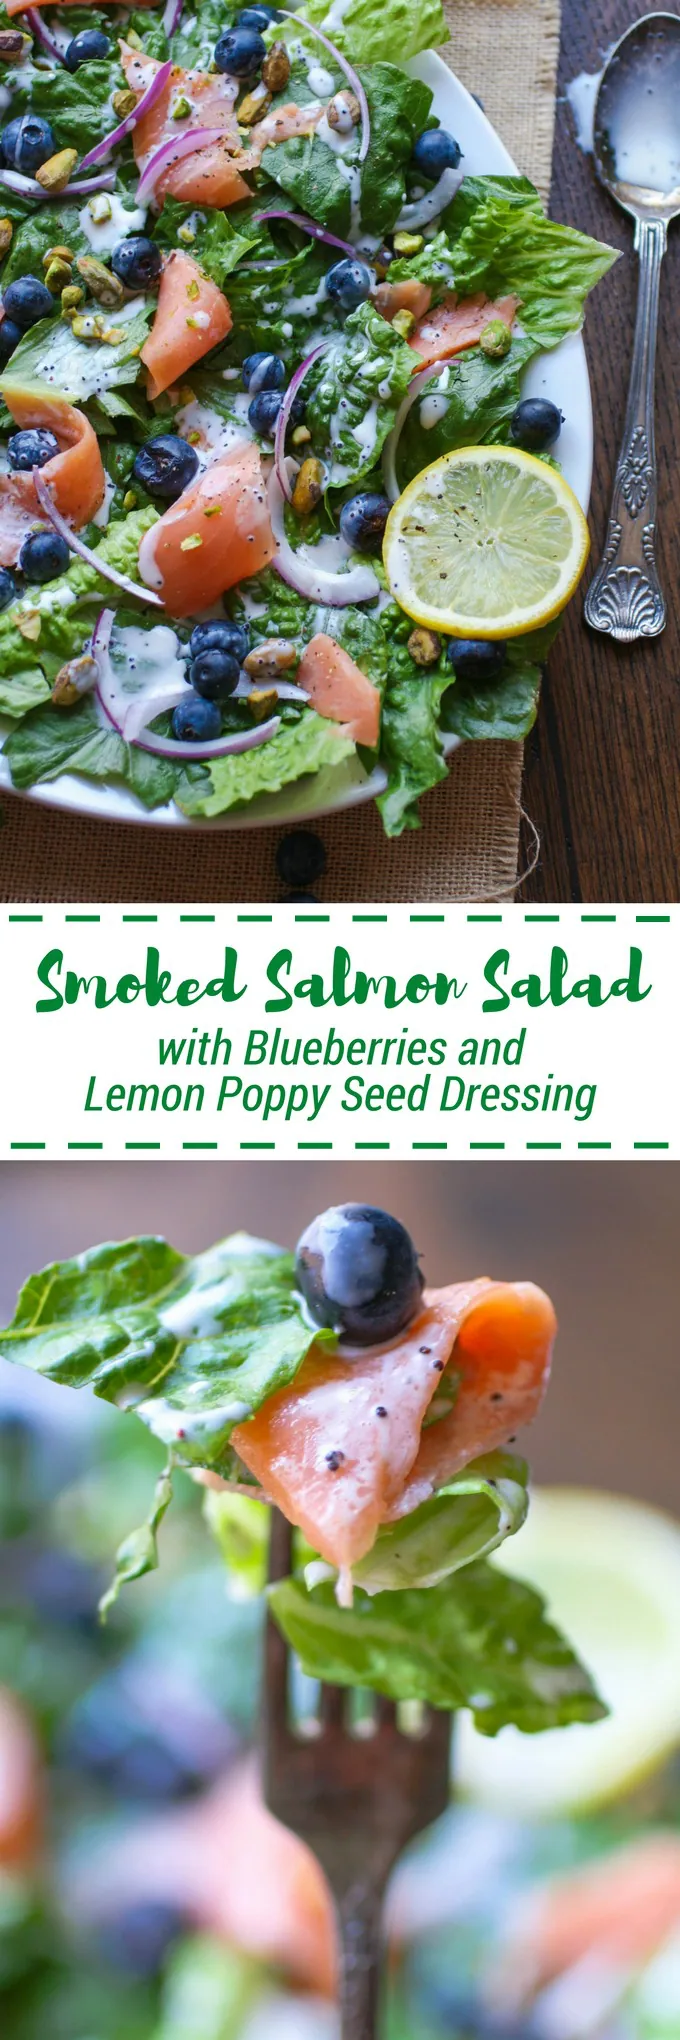 Smoked Salmon Salad with Blueberries and Lemon Poppy Seed Dressing is perfect for a summer meal. No need to turn on the oven or sacrifice flavor!